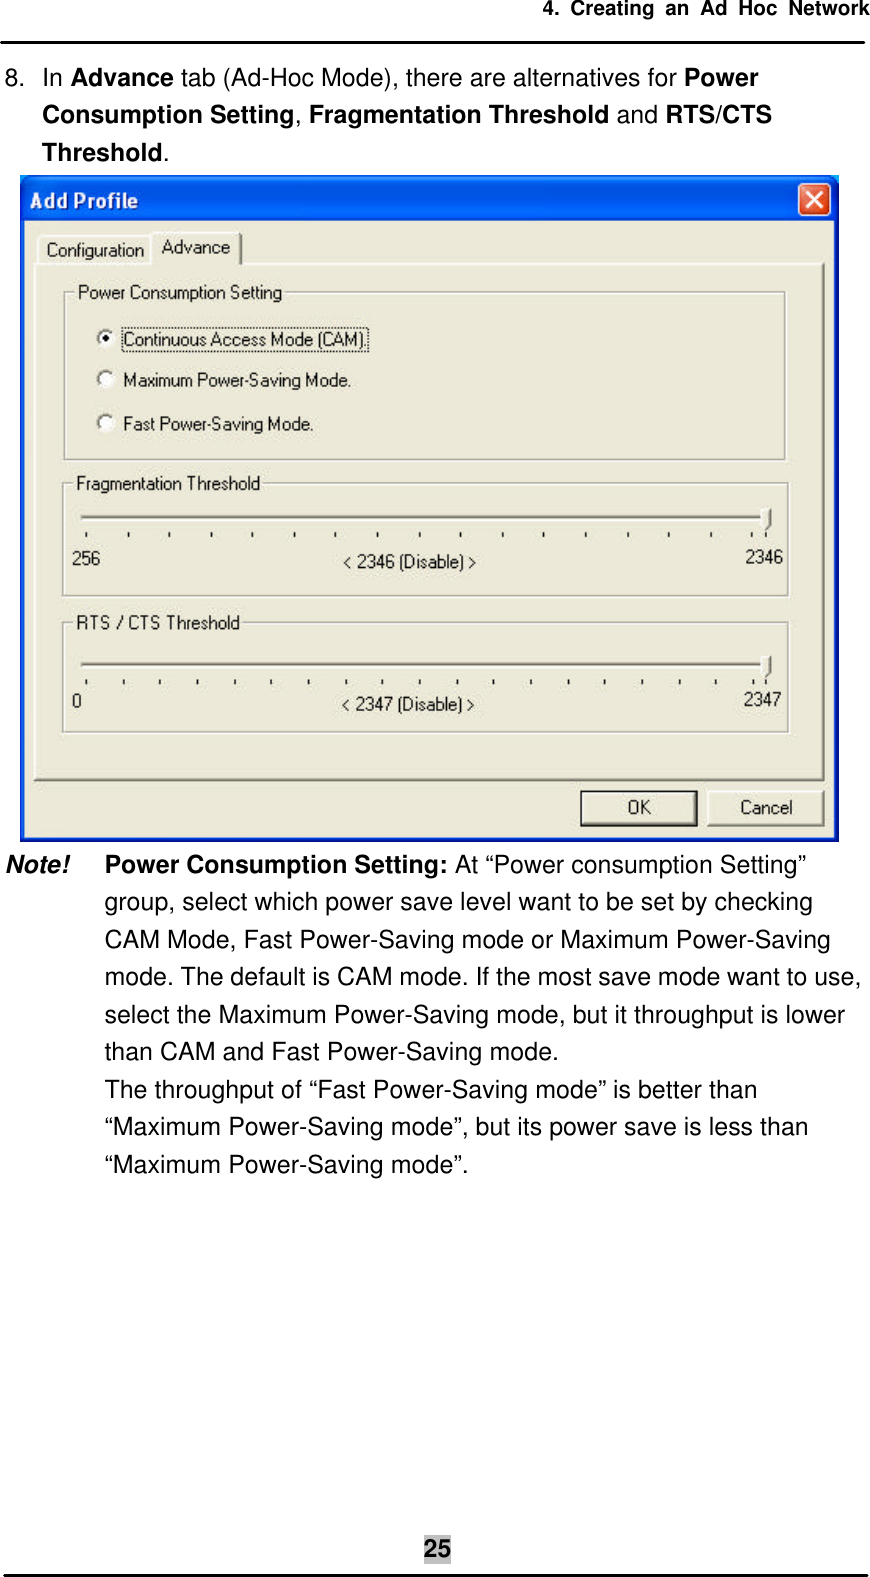 4. Creating an Ad Hoc Network  258. In Advance tab (Ad-Hoc Mode), there are alternatives for Power Consumption Setting, Fragmentation Threshold and RTS/CTS Threshold.  Note! Power Consumption Setting: At “Power consumption Setting” group, select which power save level want to be set by checking CAM Mode, Fast Power-Saving mode or Maximum Power-Saving mode. The default is CAM mode. If the most save mode want to use, select the Maximum Power-Saving mode, but it throughput is lower than CAM and Fast Power-Saving mode.  The throughput of “Fast Power-Saving mode” is better than “Maximum Power-Saving mode”, but its power save is less than “Maximum Power-Saving mode”.   